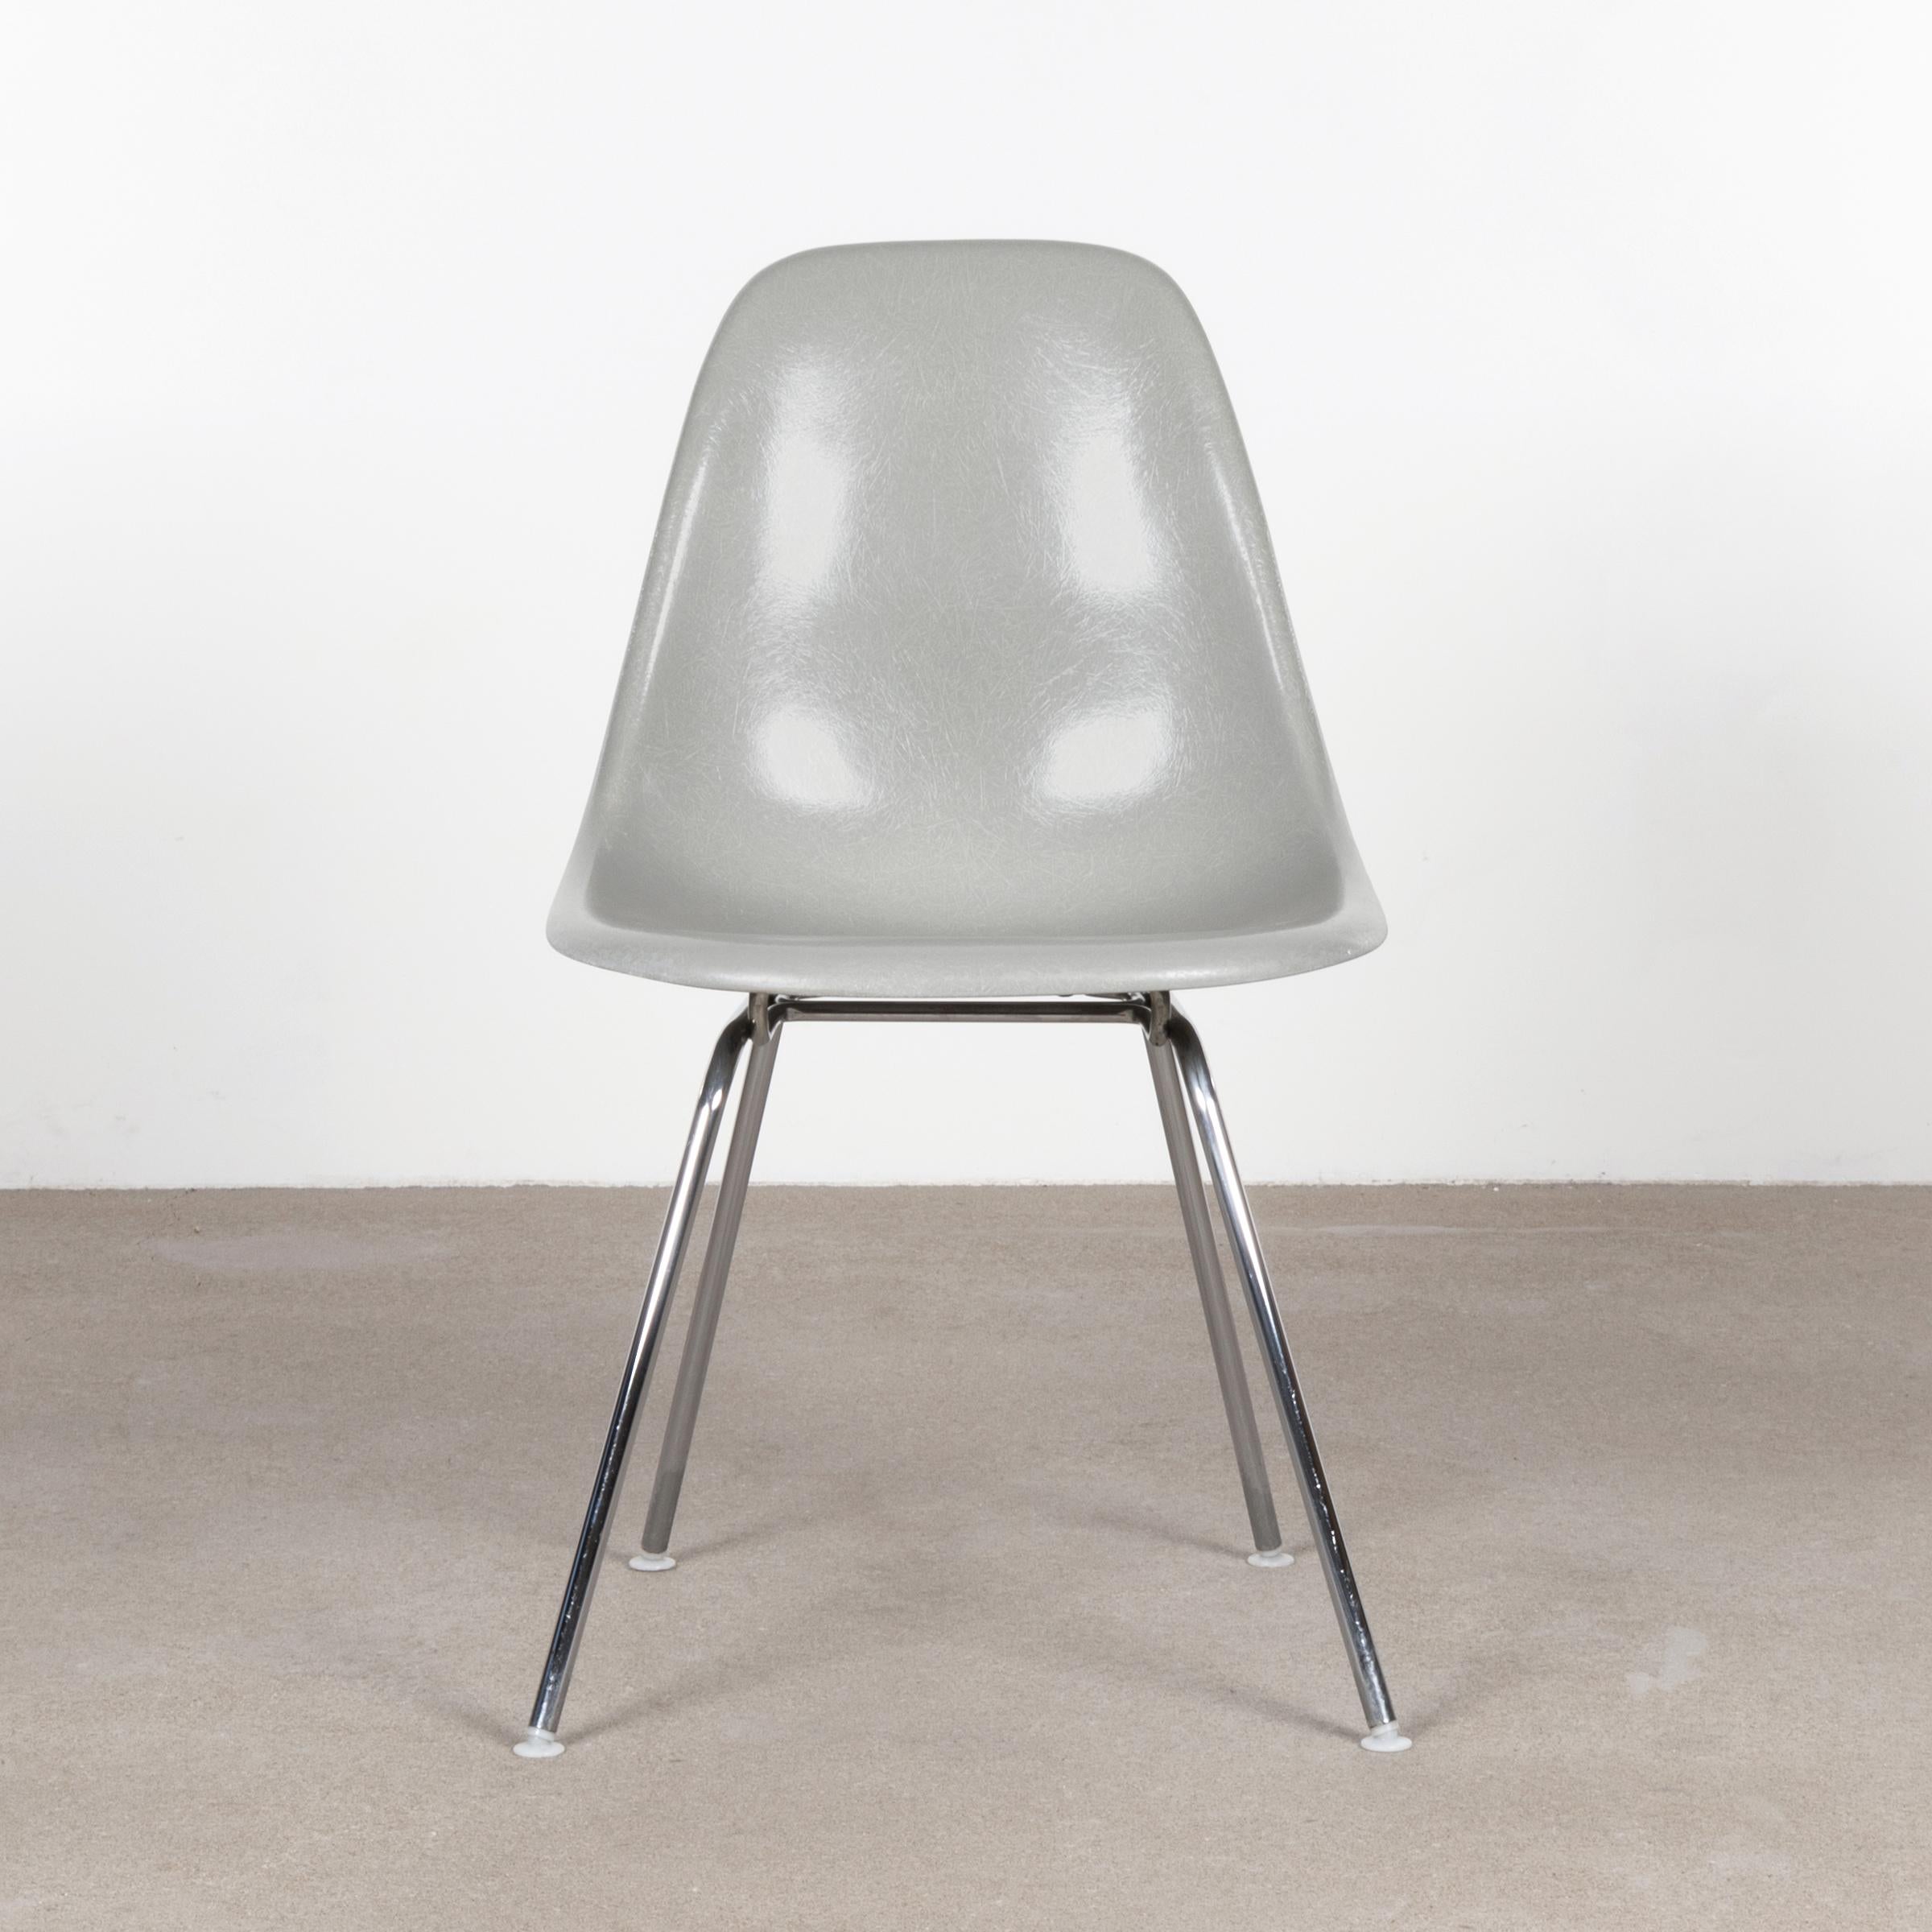 Beautiful iconic DSX chair in the rare contract color 'Sea Foam Green Light' with chrome-plated steel base and produced by Vitra in 1988. Shell is in very good / excellent condition with only slight traces of use. Chair is signed with manufacturer